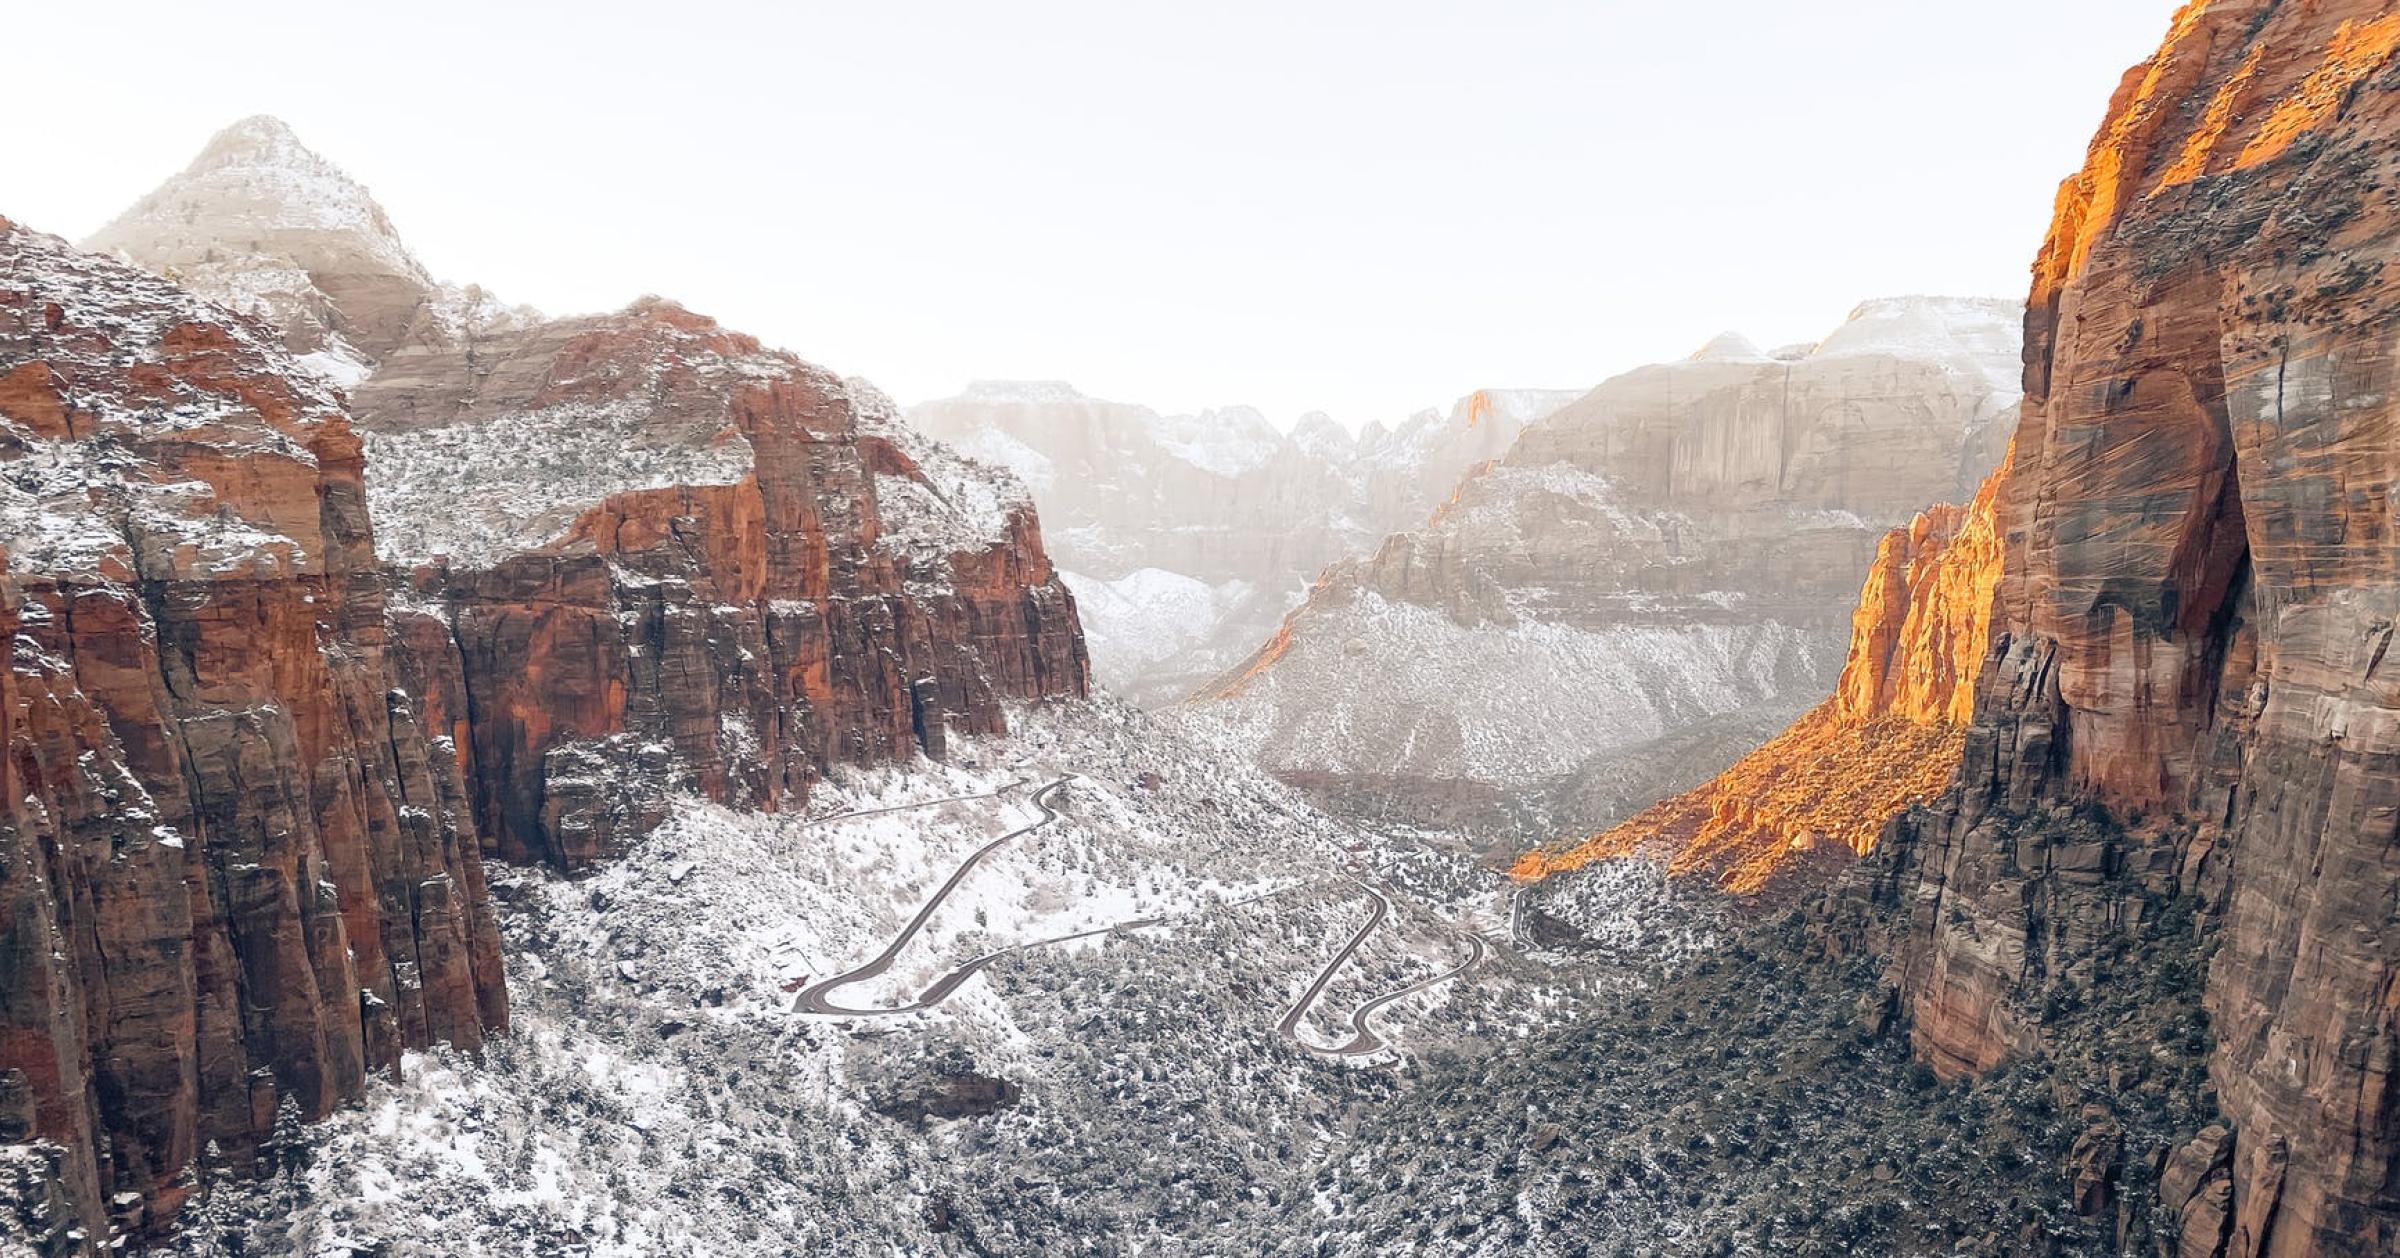 A wide landscape photo of a deep red rock canyon with a fresh dusting of snow and foggy clouds. A winding road on the canyon floor.